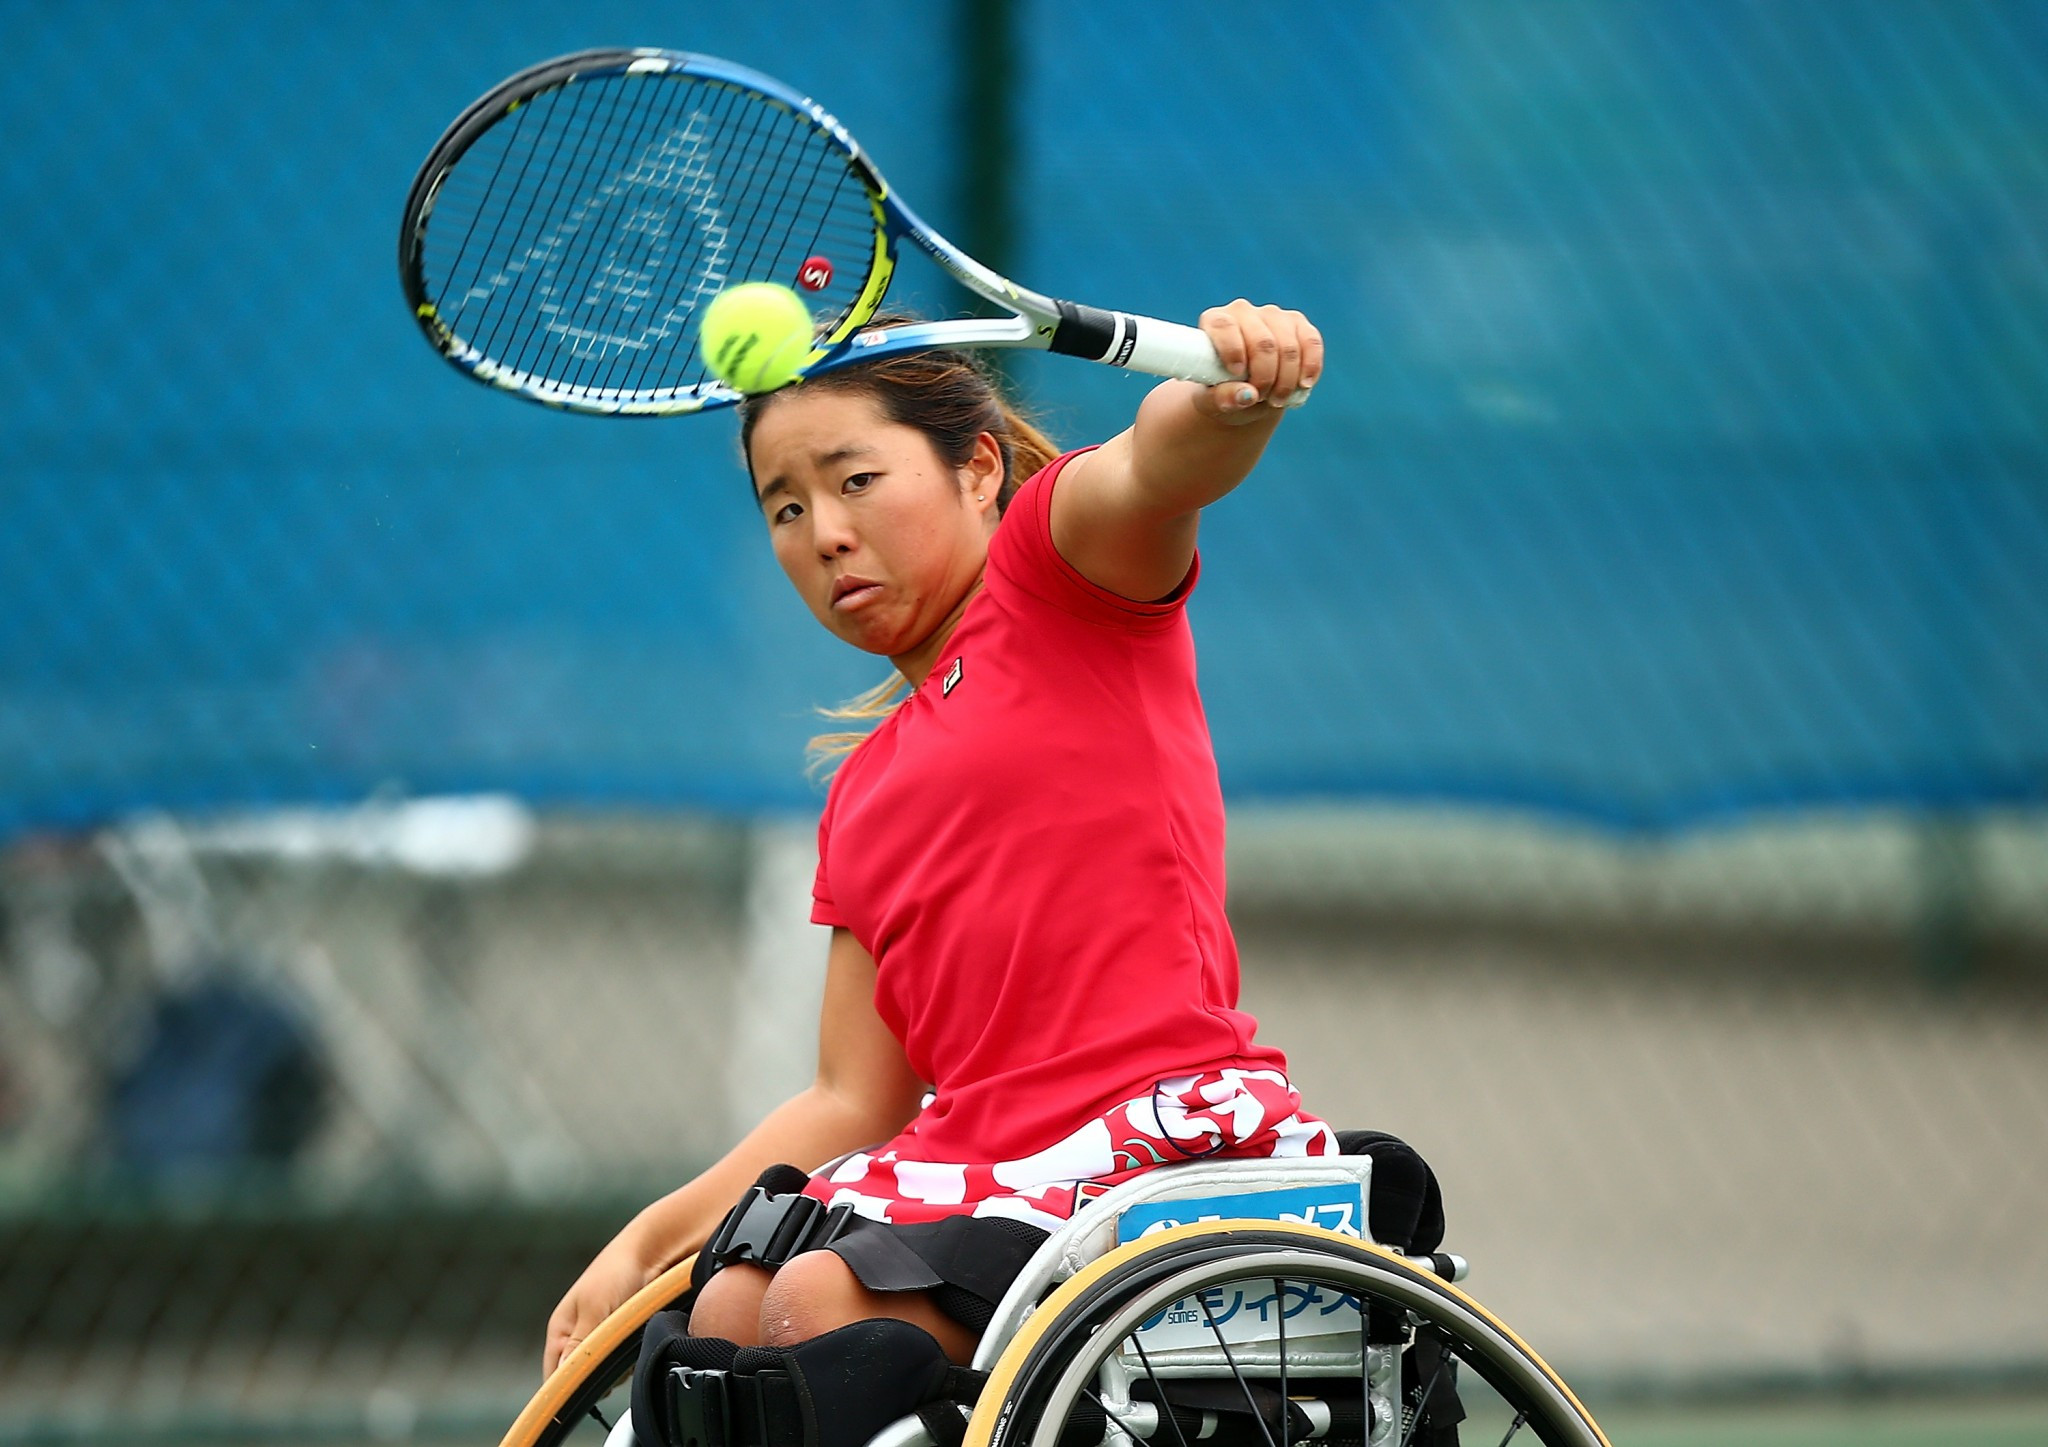 Top women's singles seed Yui Kamiji has made the semi-finals in Nottingham ©Getty Images